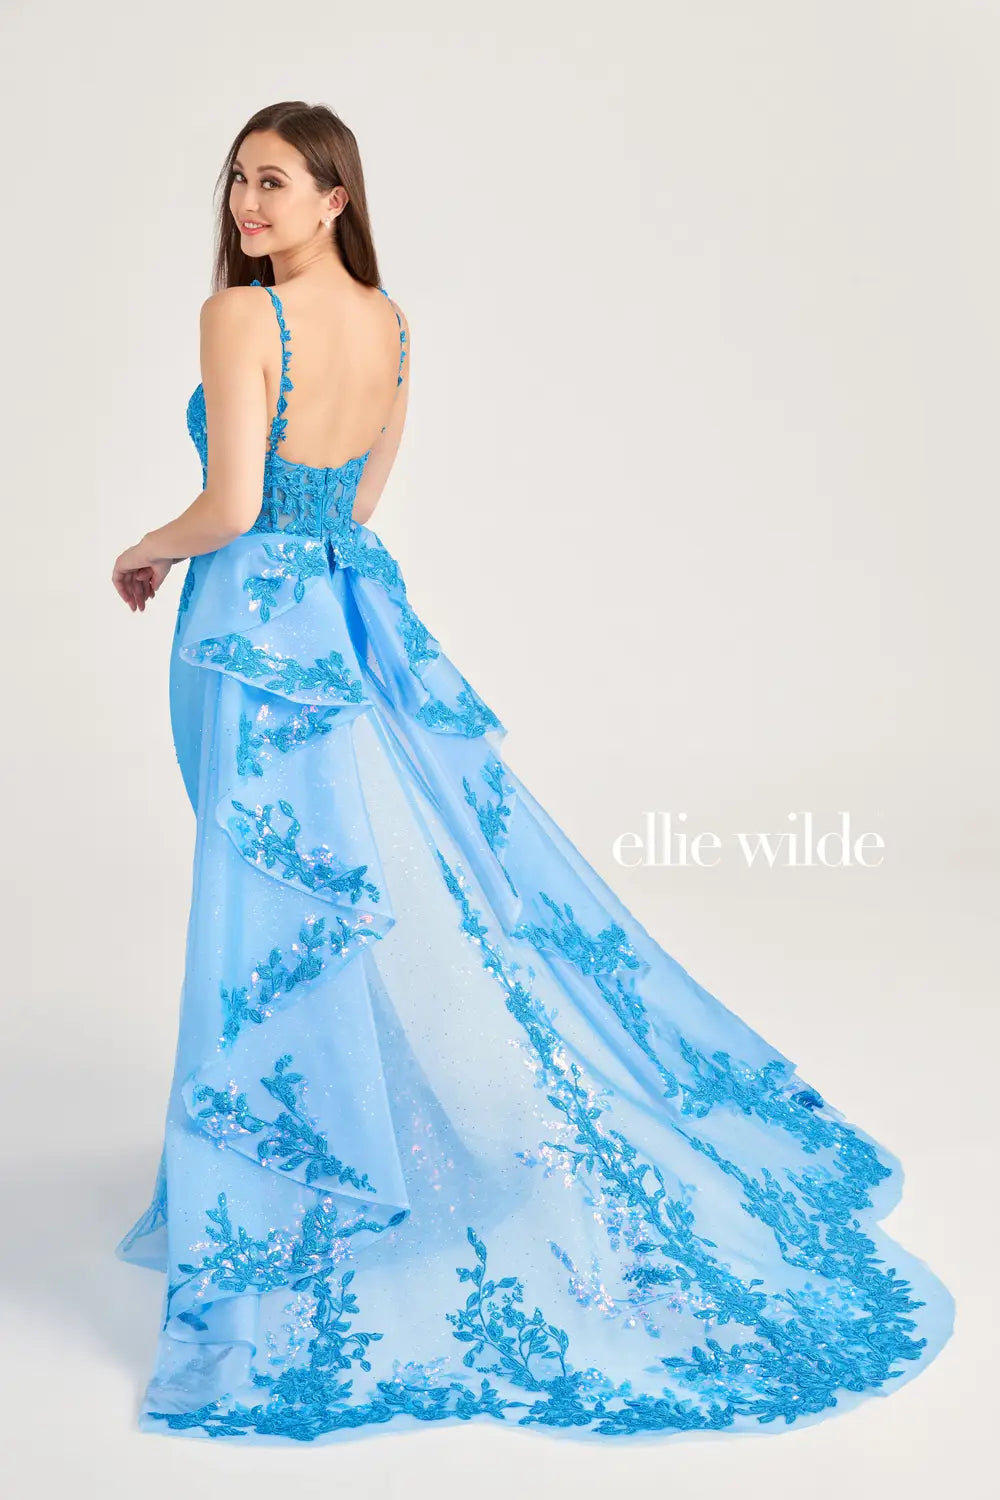 Be the center of attention in the Ellie Wilde EW35207 prom gown. Featuring a stunning lace sequin bodice with sheer corset detailing and a detachable side overskirt for added drama, this dress is perfect for pageants and prom. Turn heads and feel like a queen with this elegant and eye-catching dress.  Sizes: 00-16  Colors: Sage, Ocean Blue